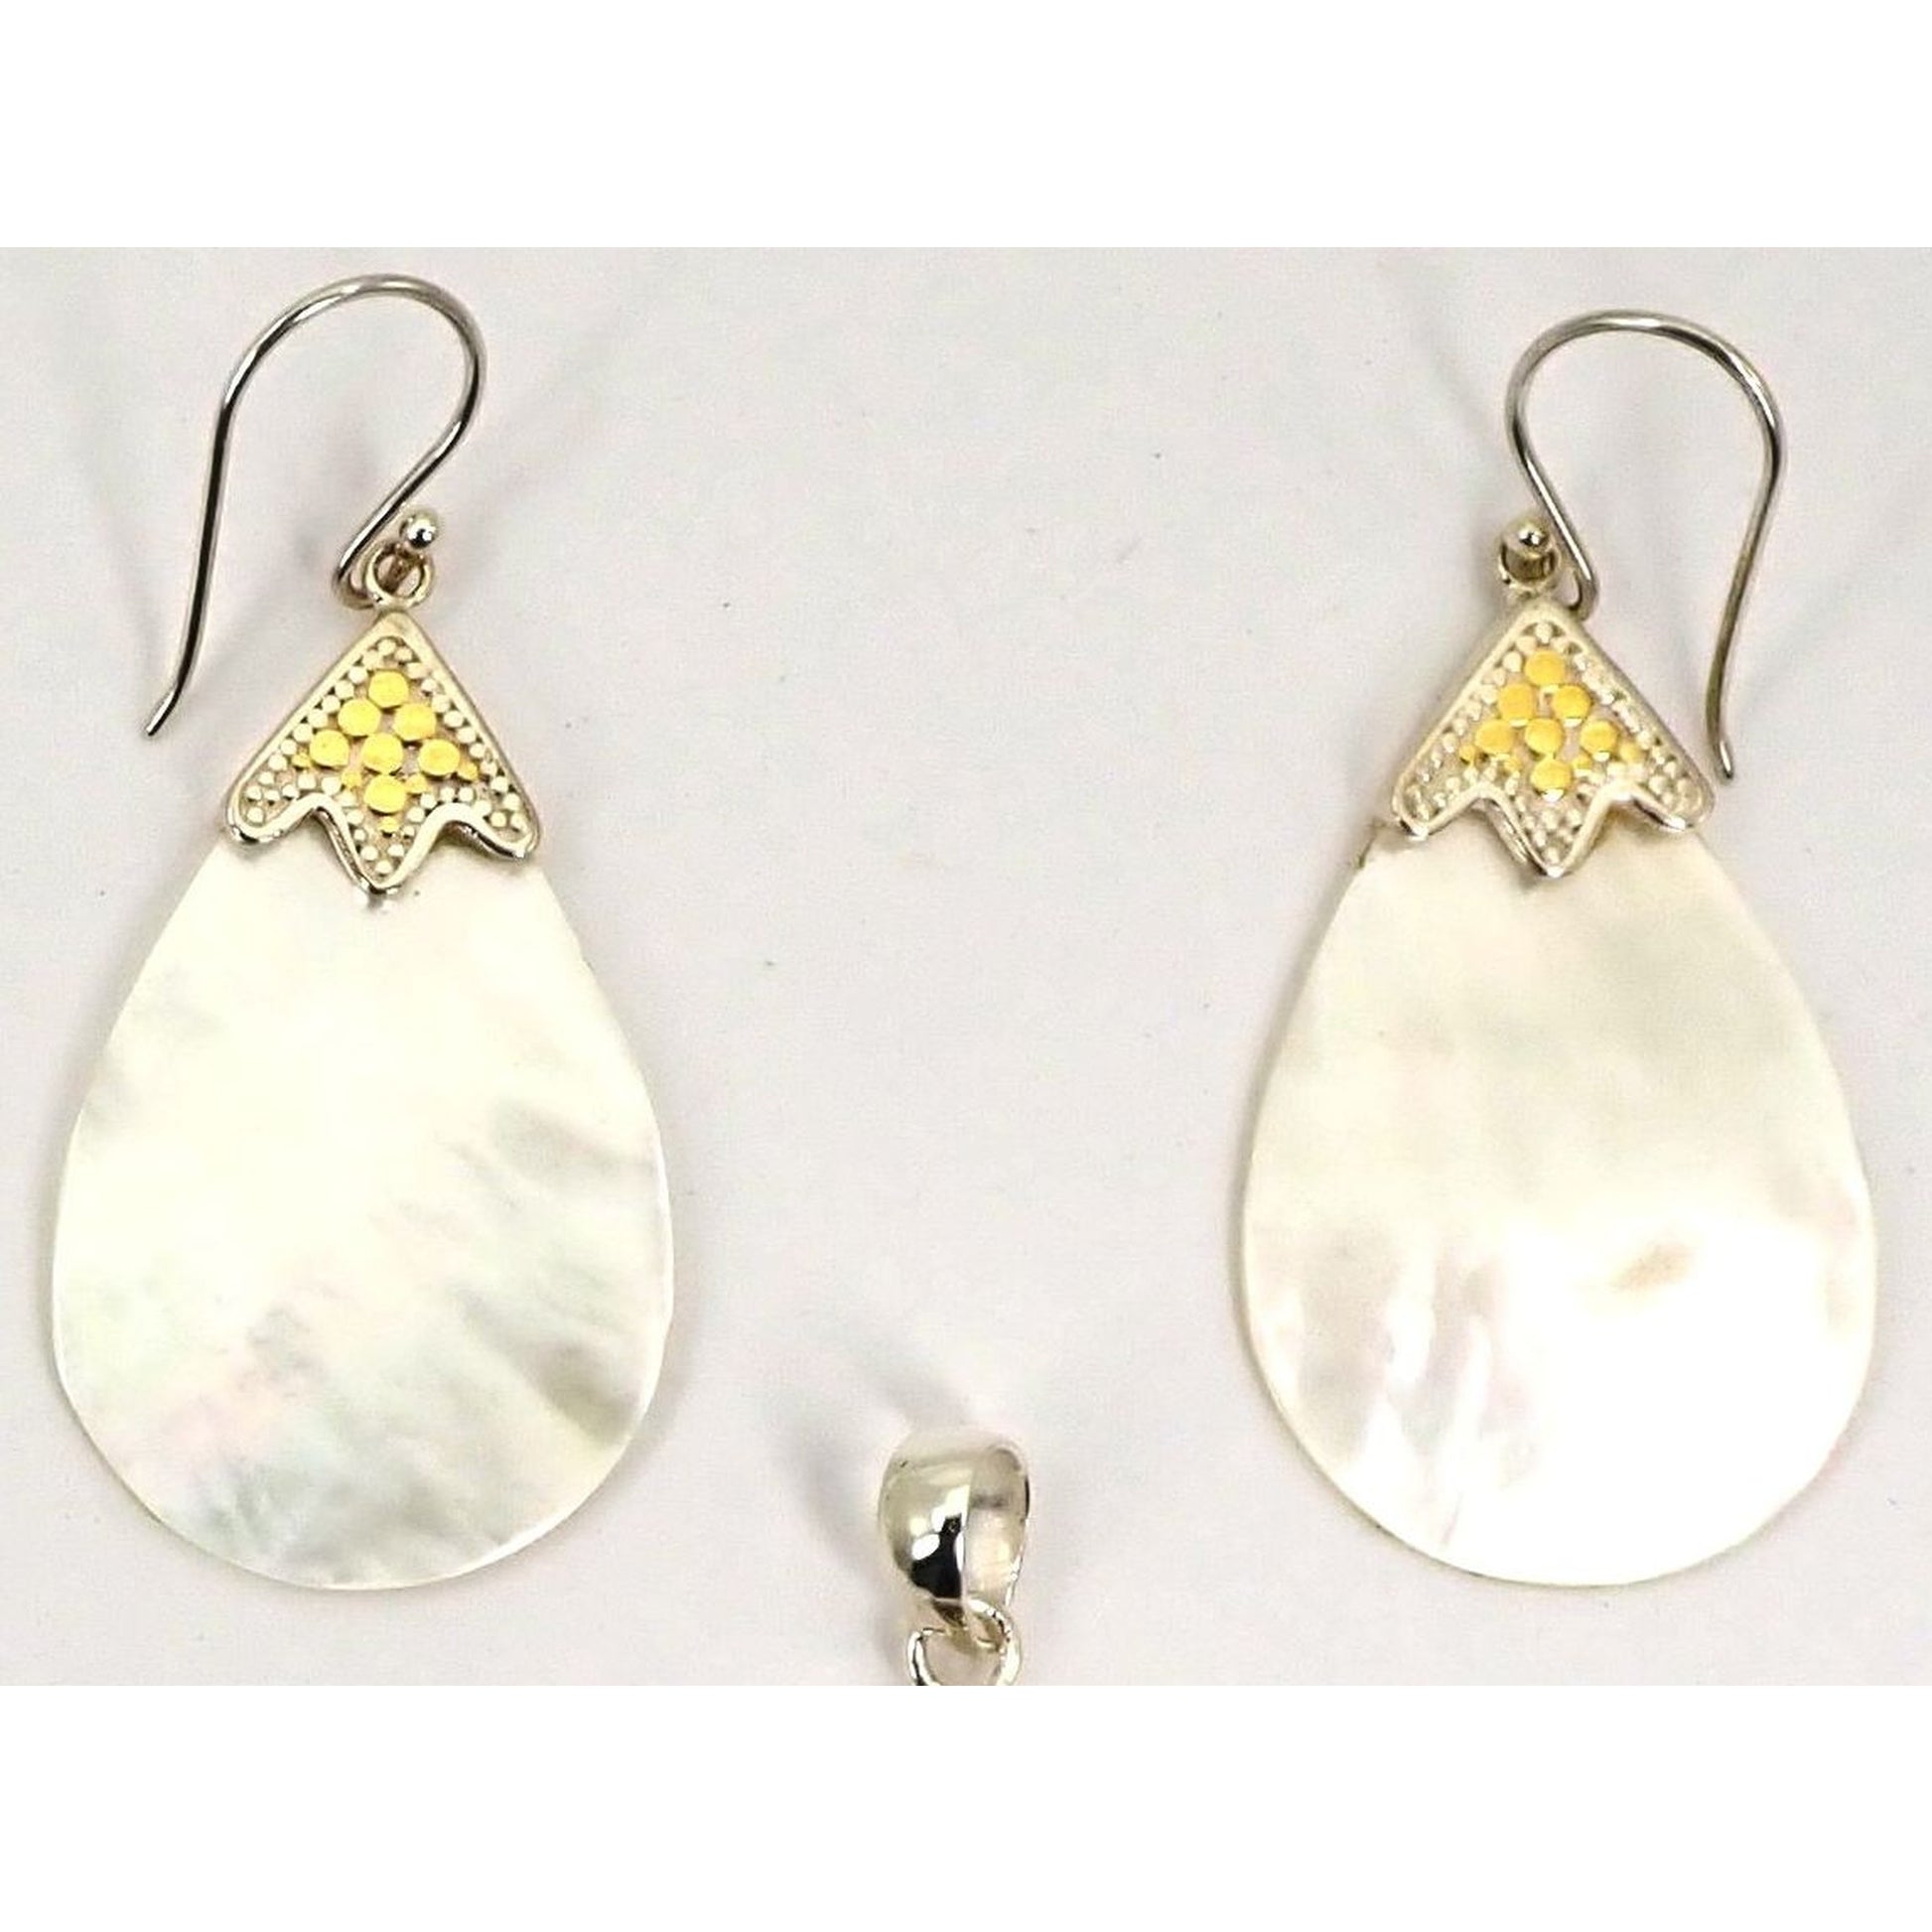 Silver and gold earrings with teardrop shell stones.